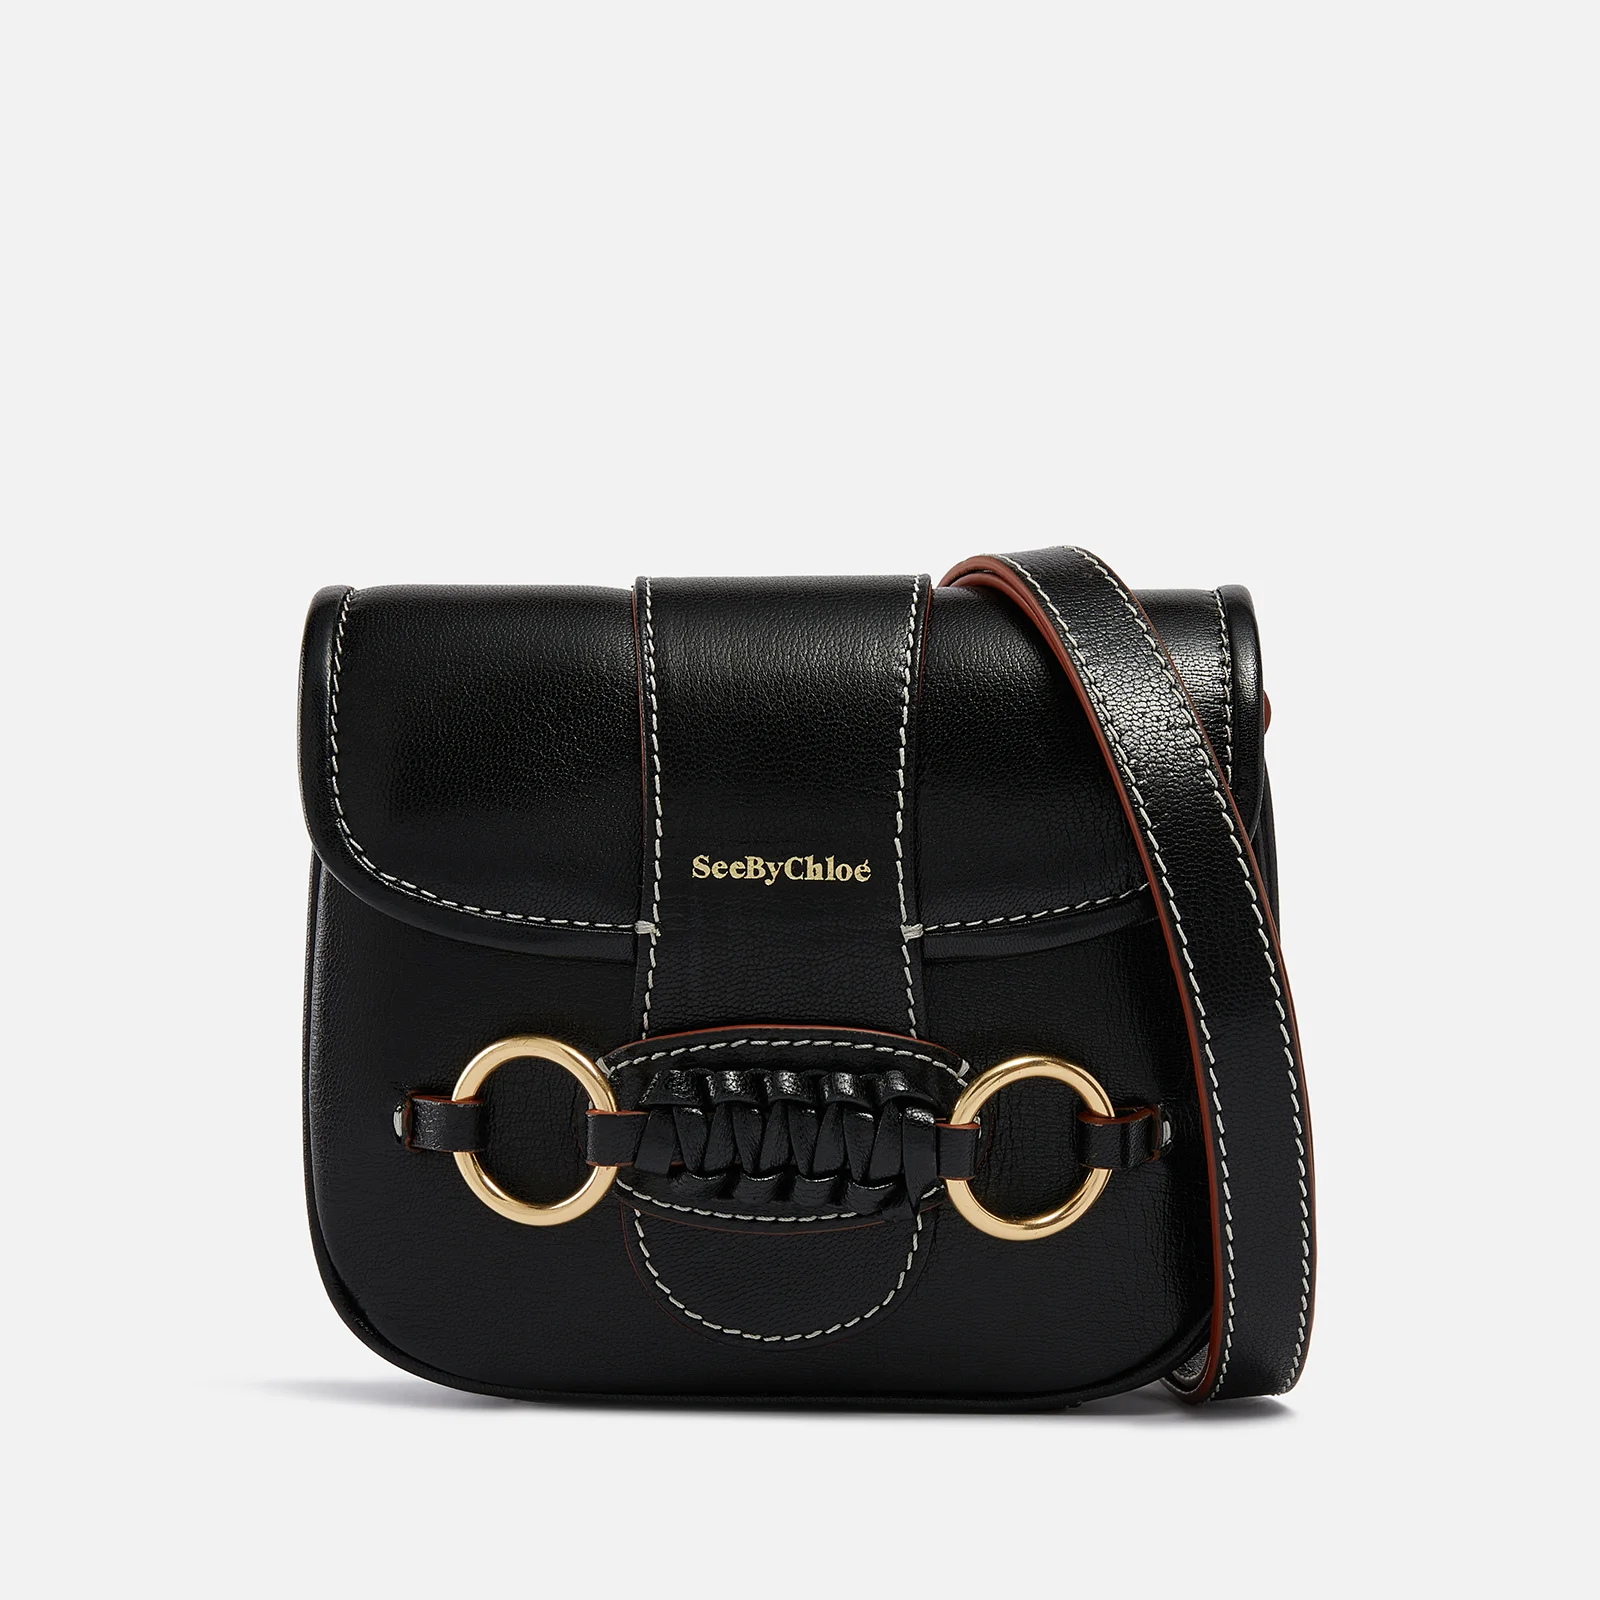 See By Chloé Saddie Leather Bag Image 1